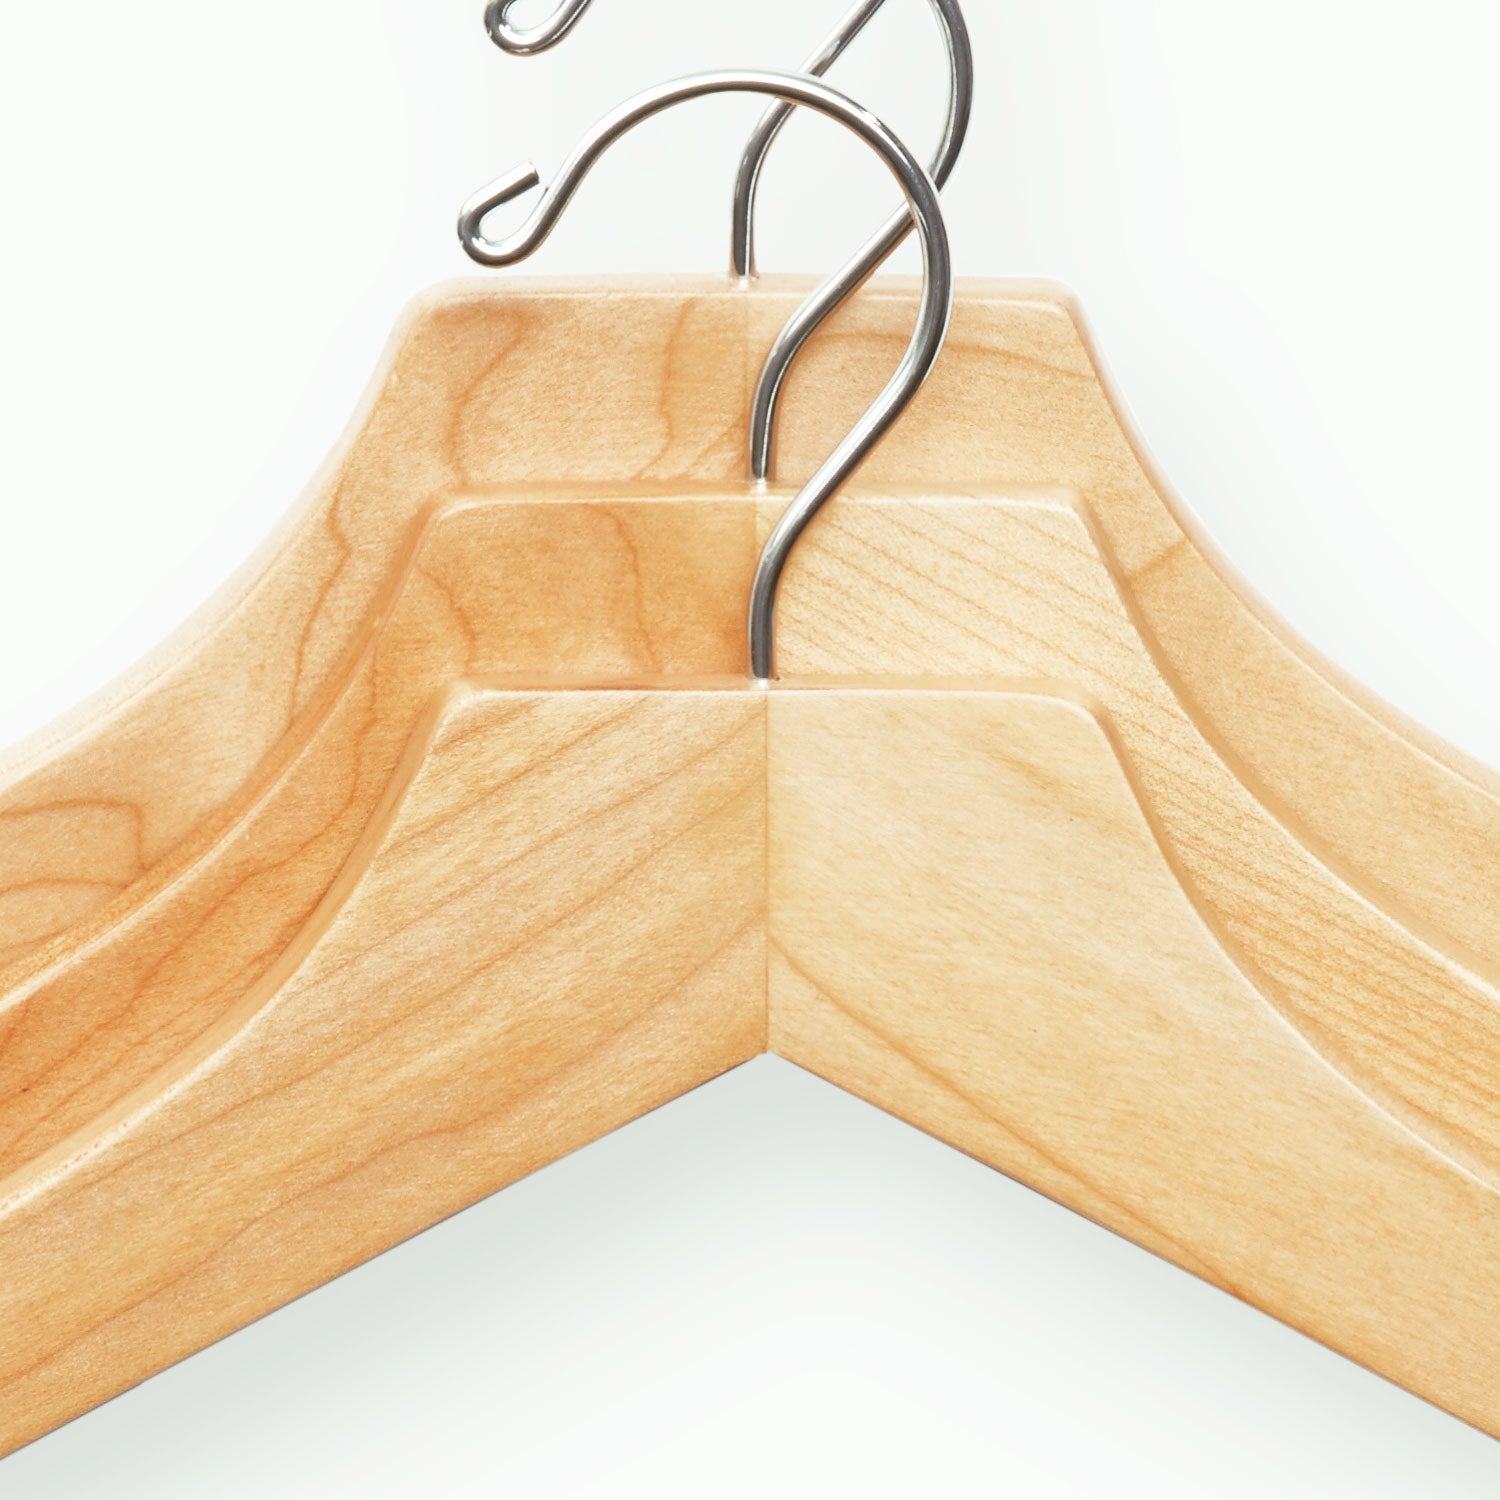 Three Extra-Large 21" Luxury Wooden Sweater and Polo Hangers with shoulder flocking on a white background by KirbyAllison.com.